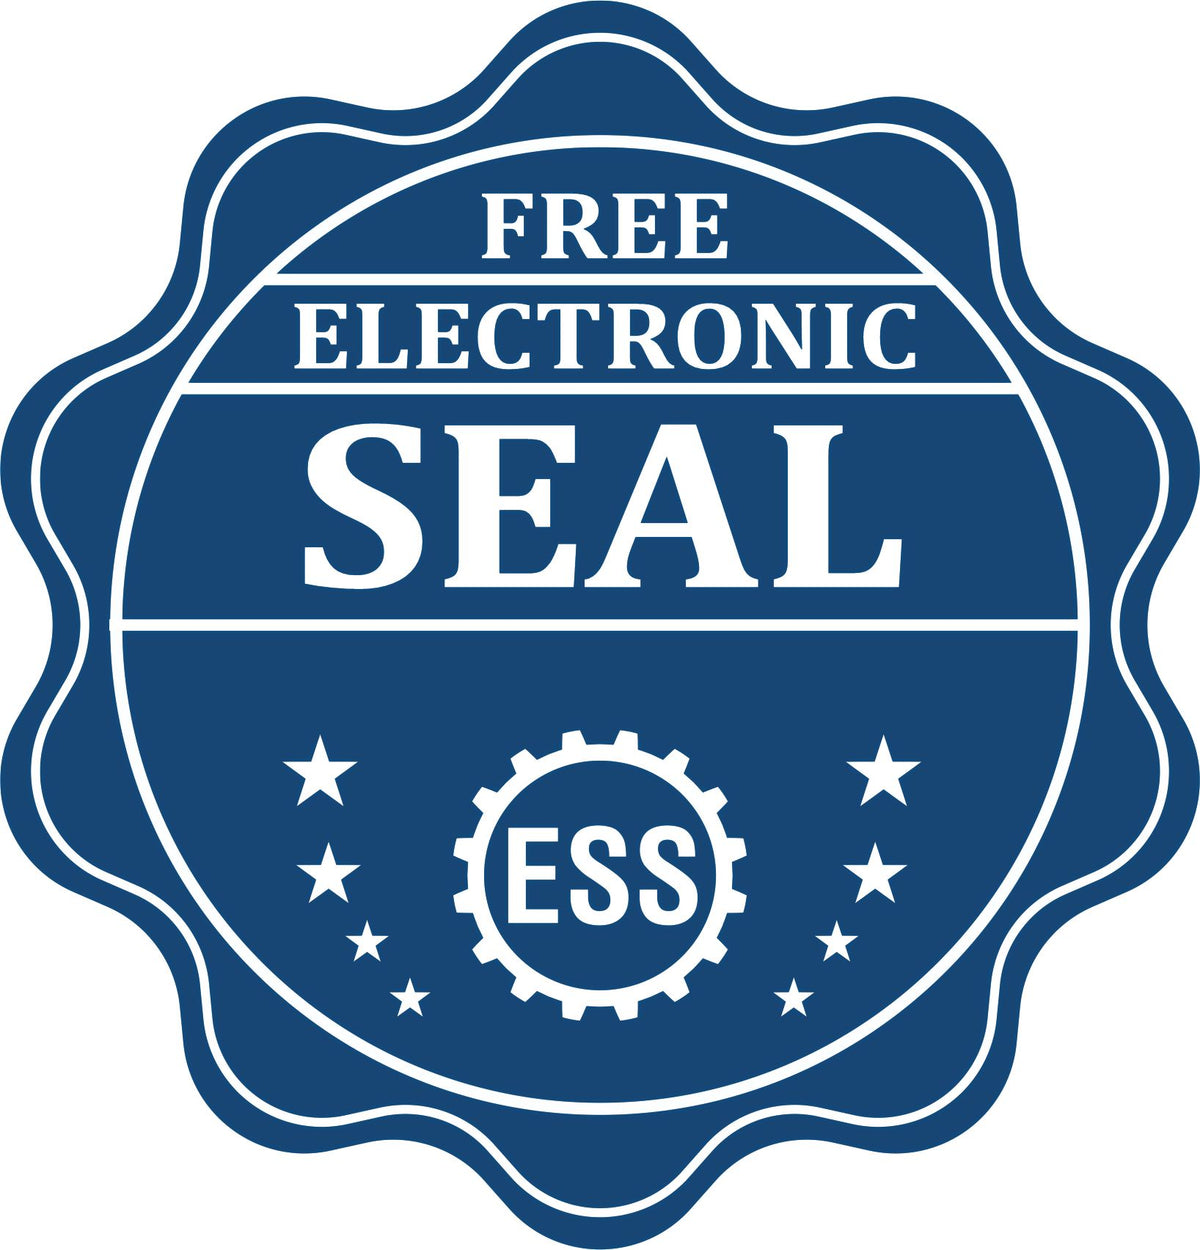 A badge showing a free electronic seal for the Soft Iowa Professional Geologist Seal with stars and the ESS gear on the emblem.